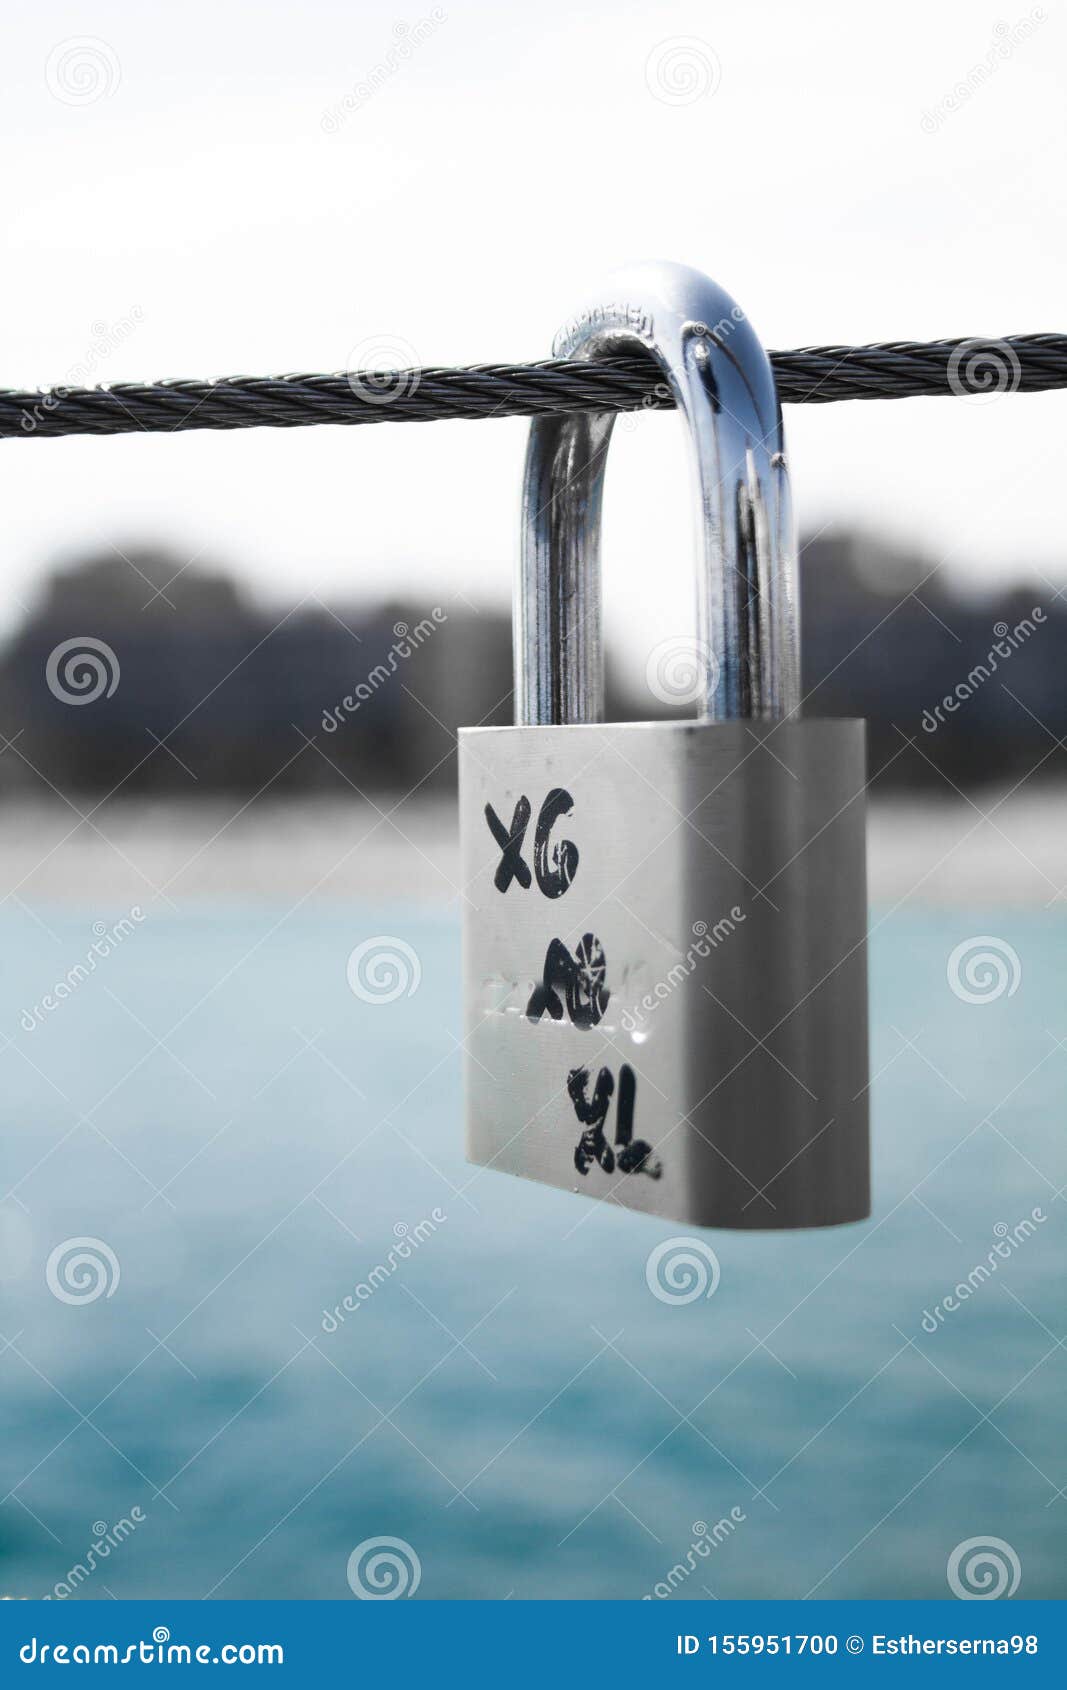 gray padlock closed on the rope